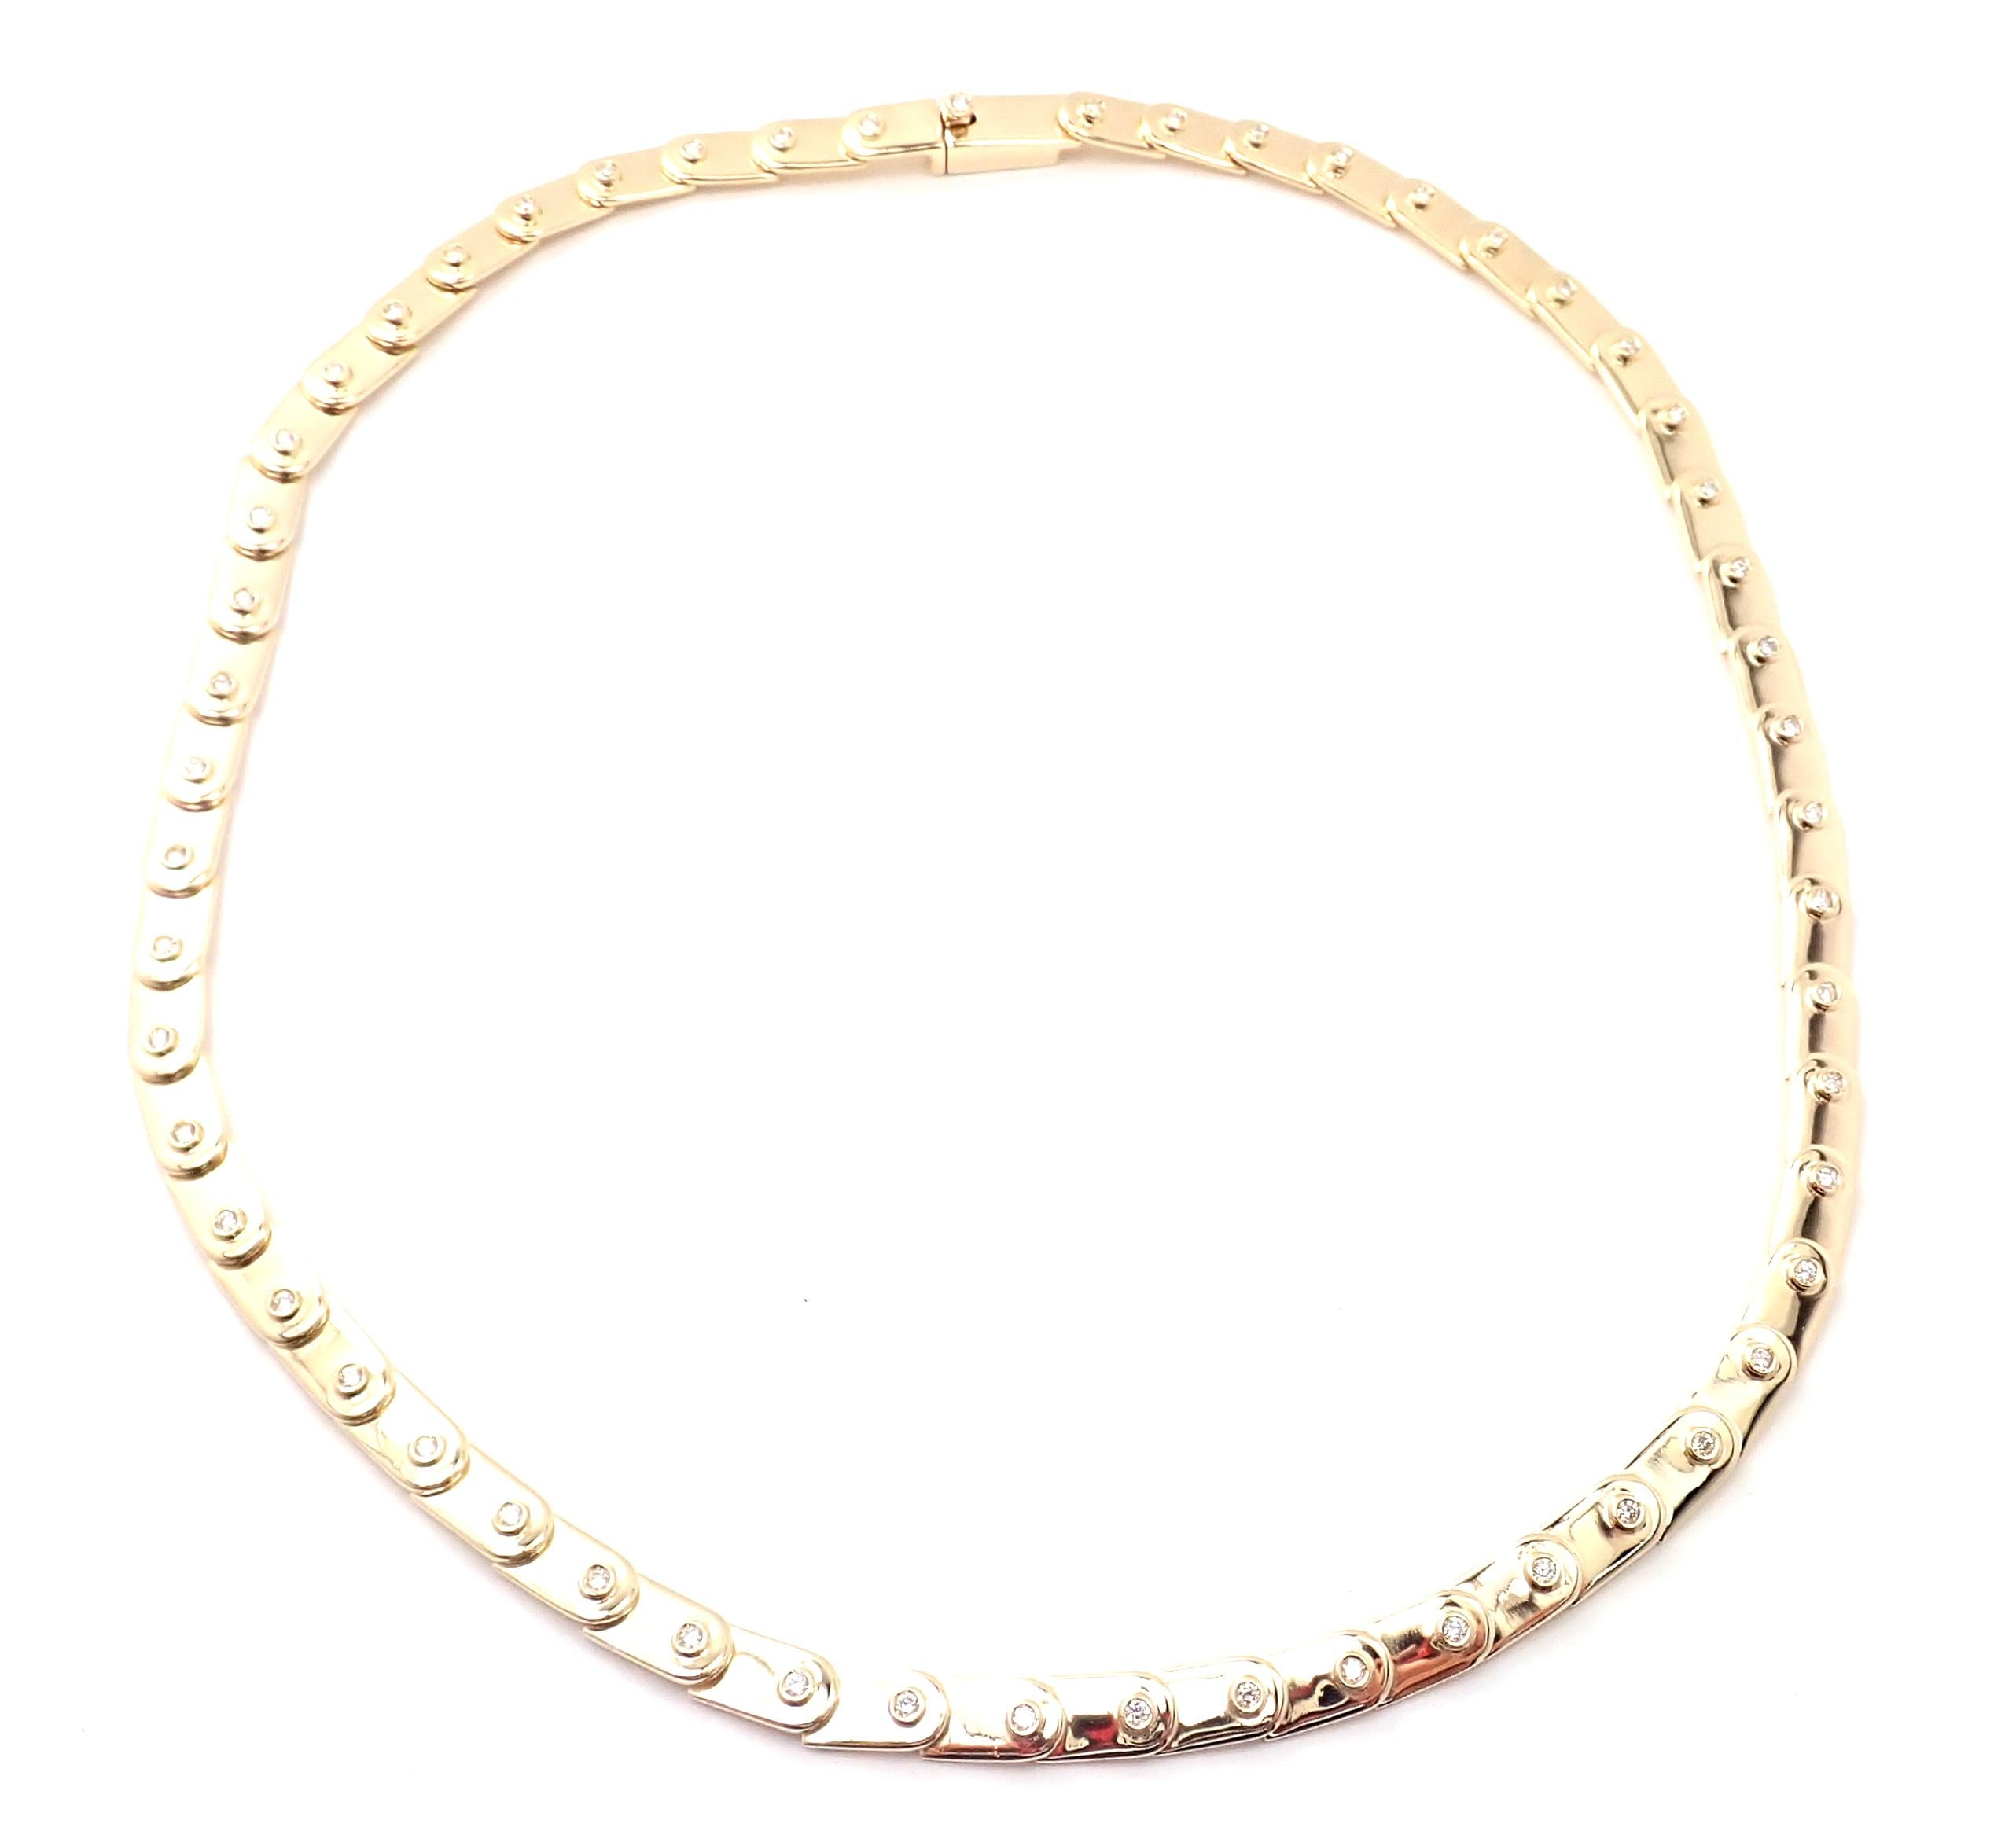 18k yellow gold diamond tennis necklace by Gucci.
With 55 round brilliant cut diamonds VS1 clarity, G color total weight approximately 1.1ct
Details:
Length: 15